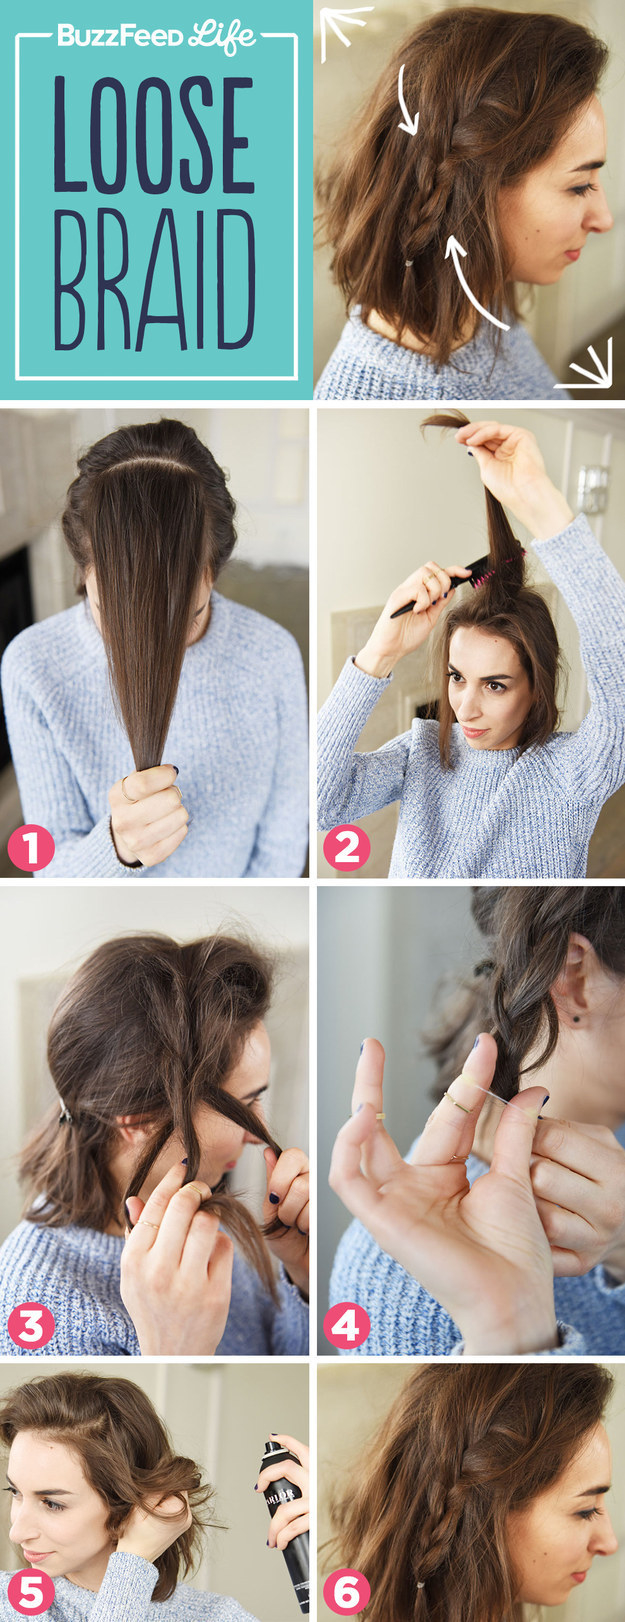 10 Quick And Easy Hairstyles For When You Sleep Through Your Alarm -  Society19 | Easy hair updos, Long hair styles, Hair